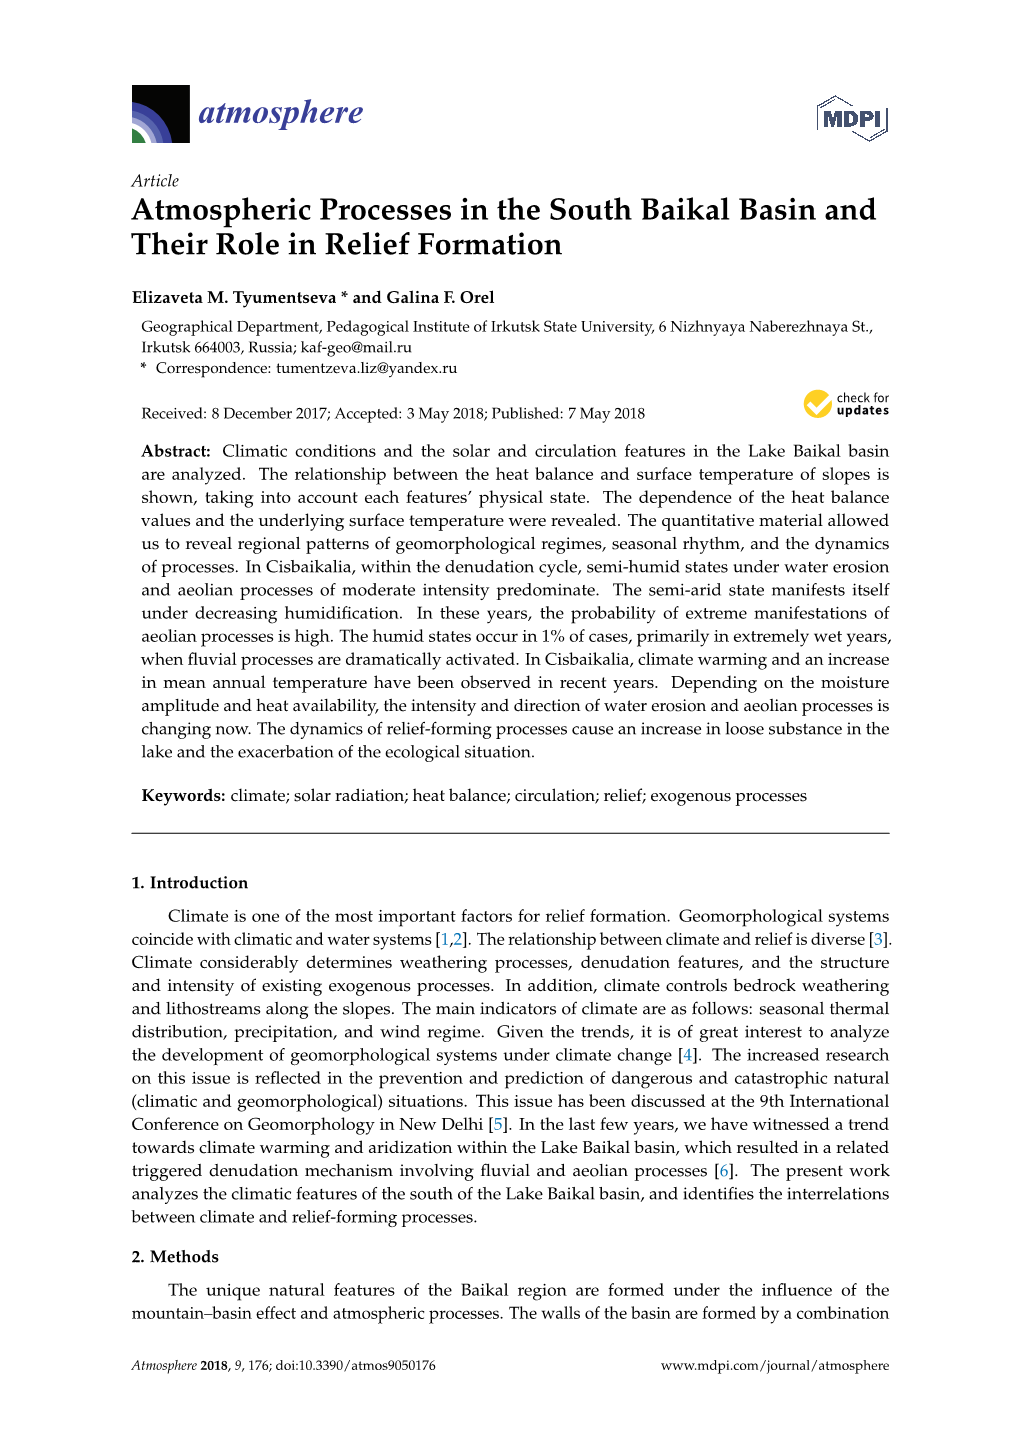 Atmospheric Processes in the South Baikal Basin and Their Role in Relief Formation